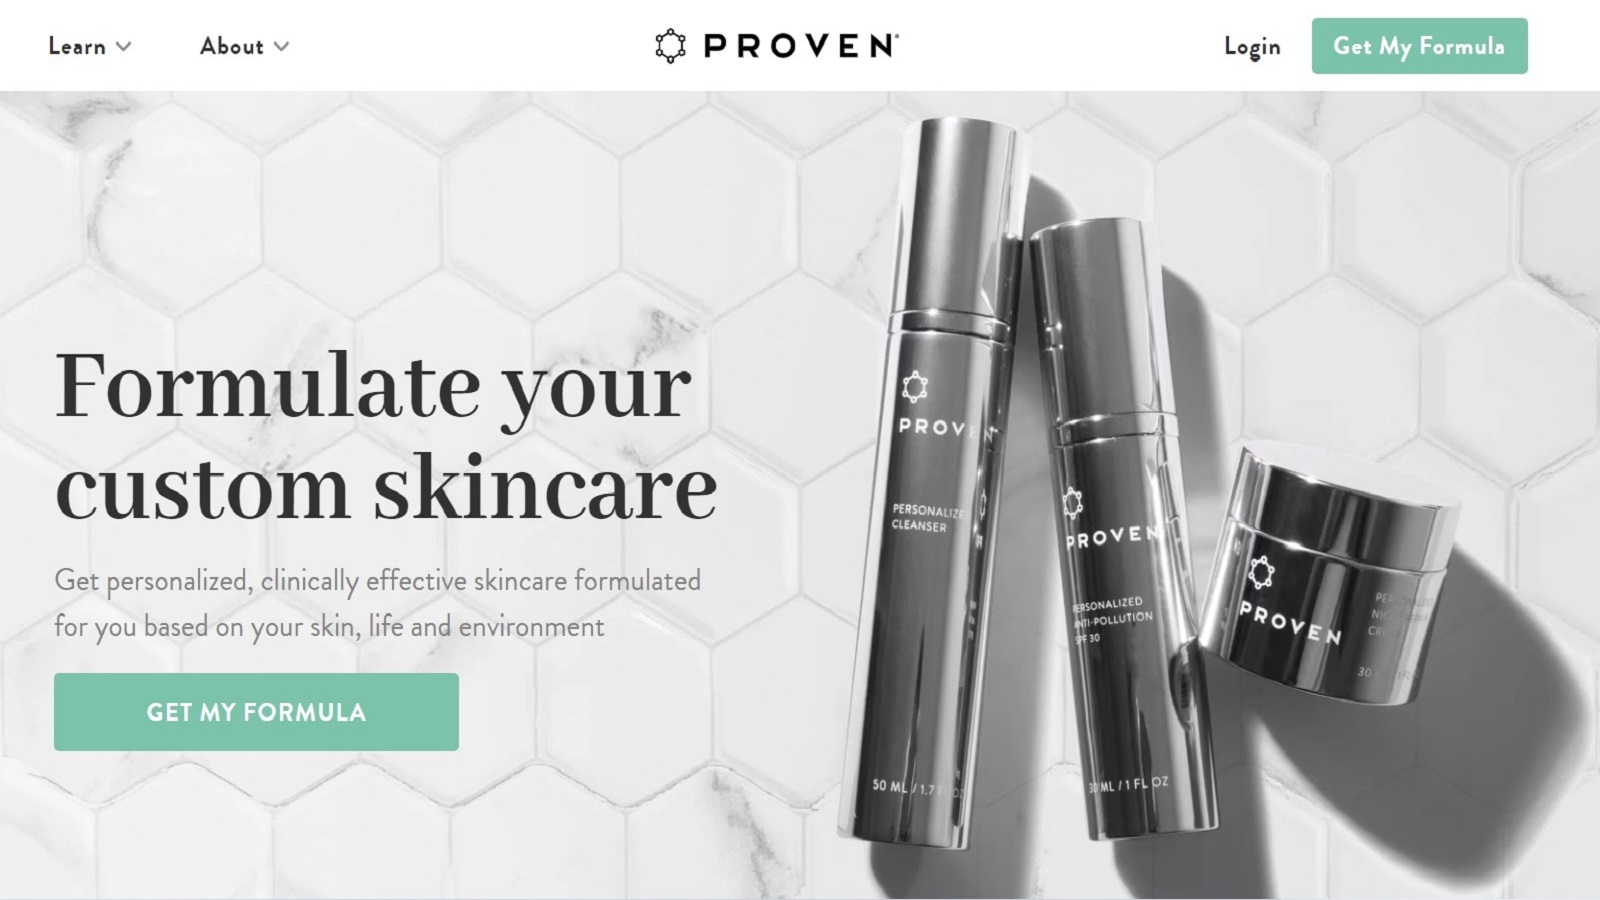 Proven Skincare Review: Does the Customized Skincare from It Really Work?